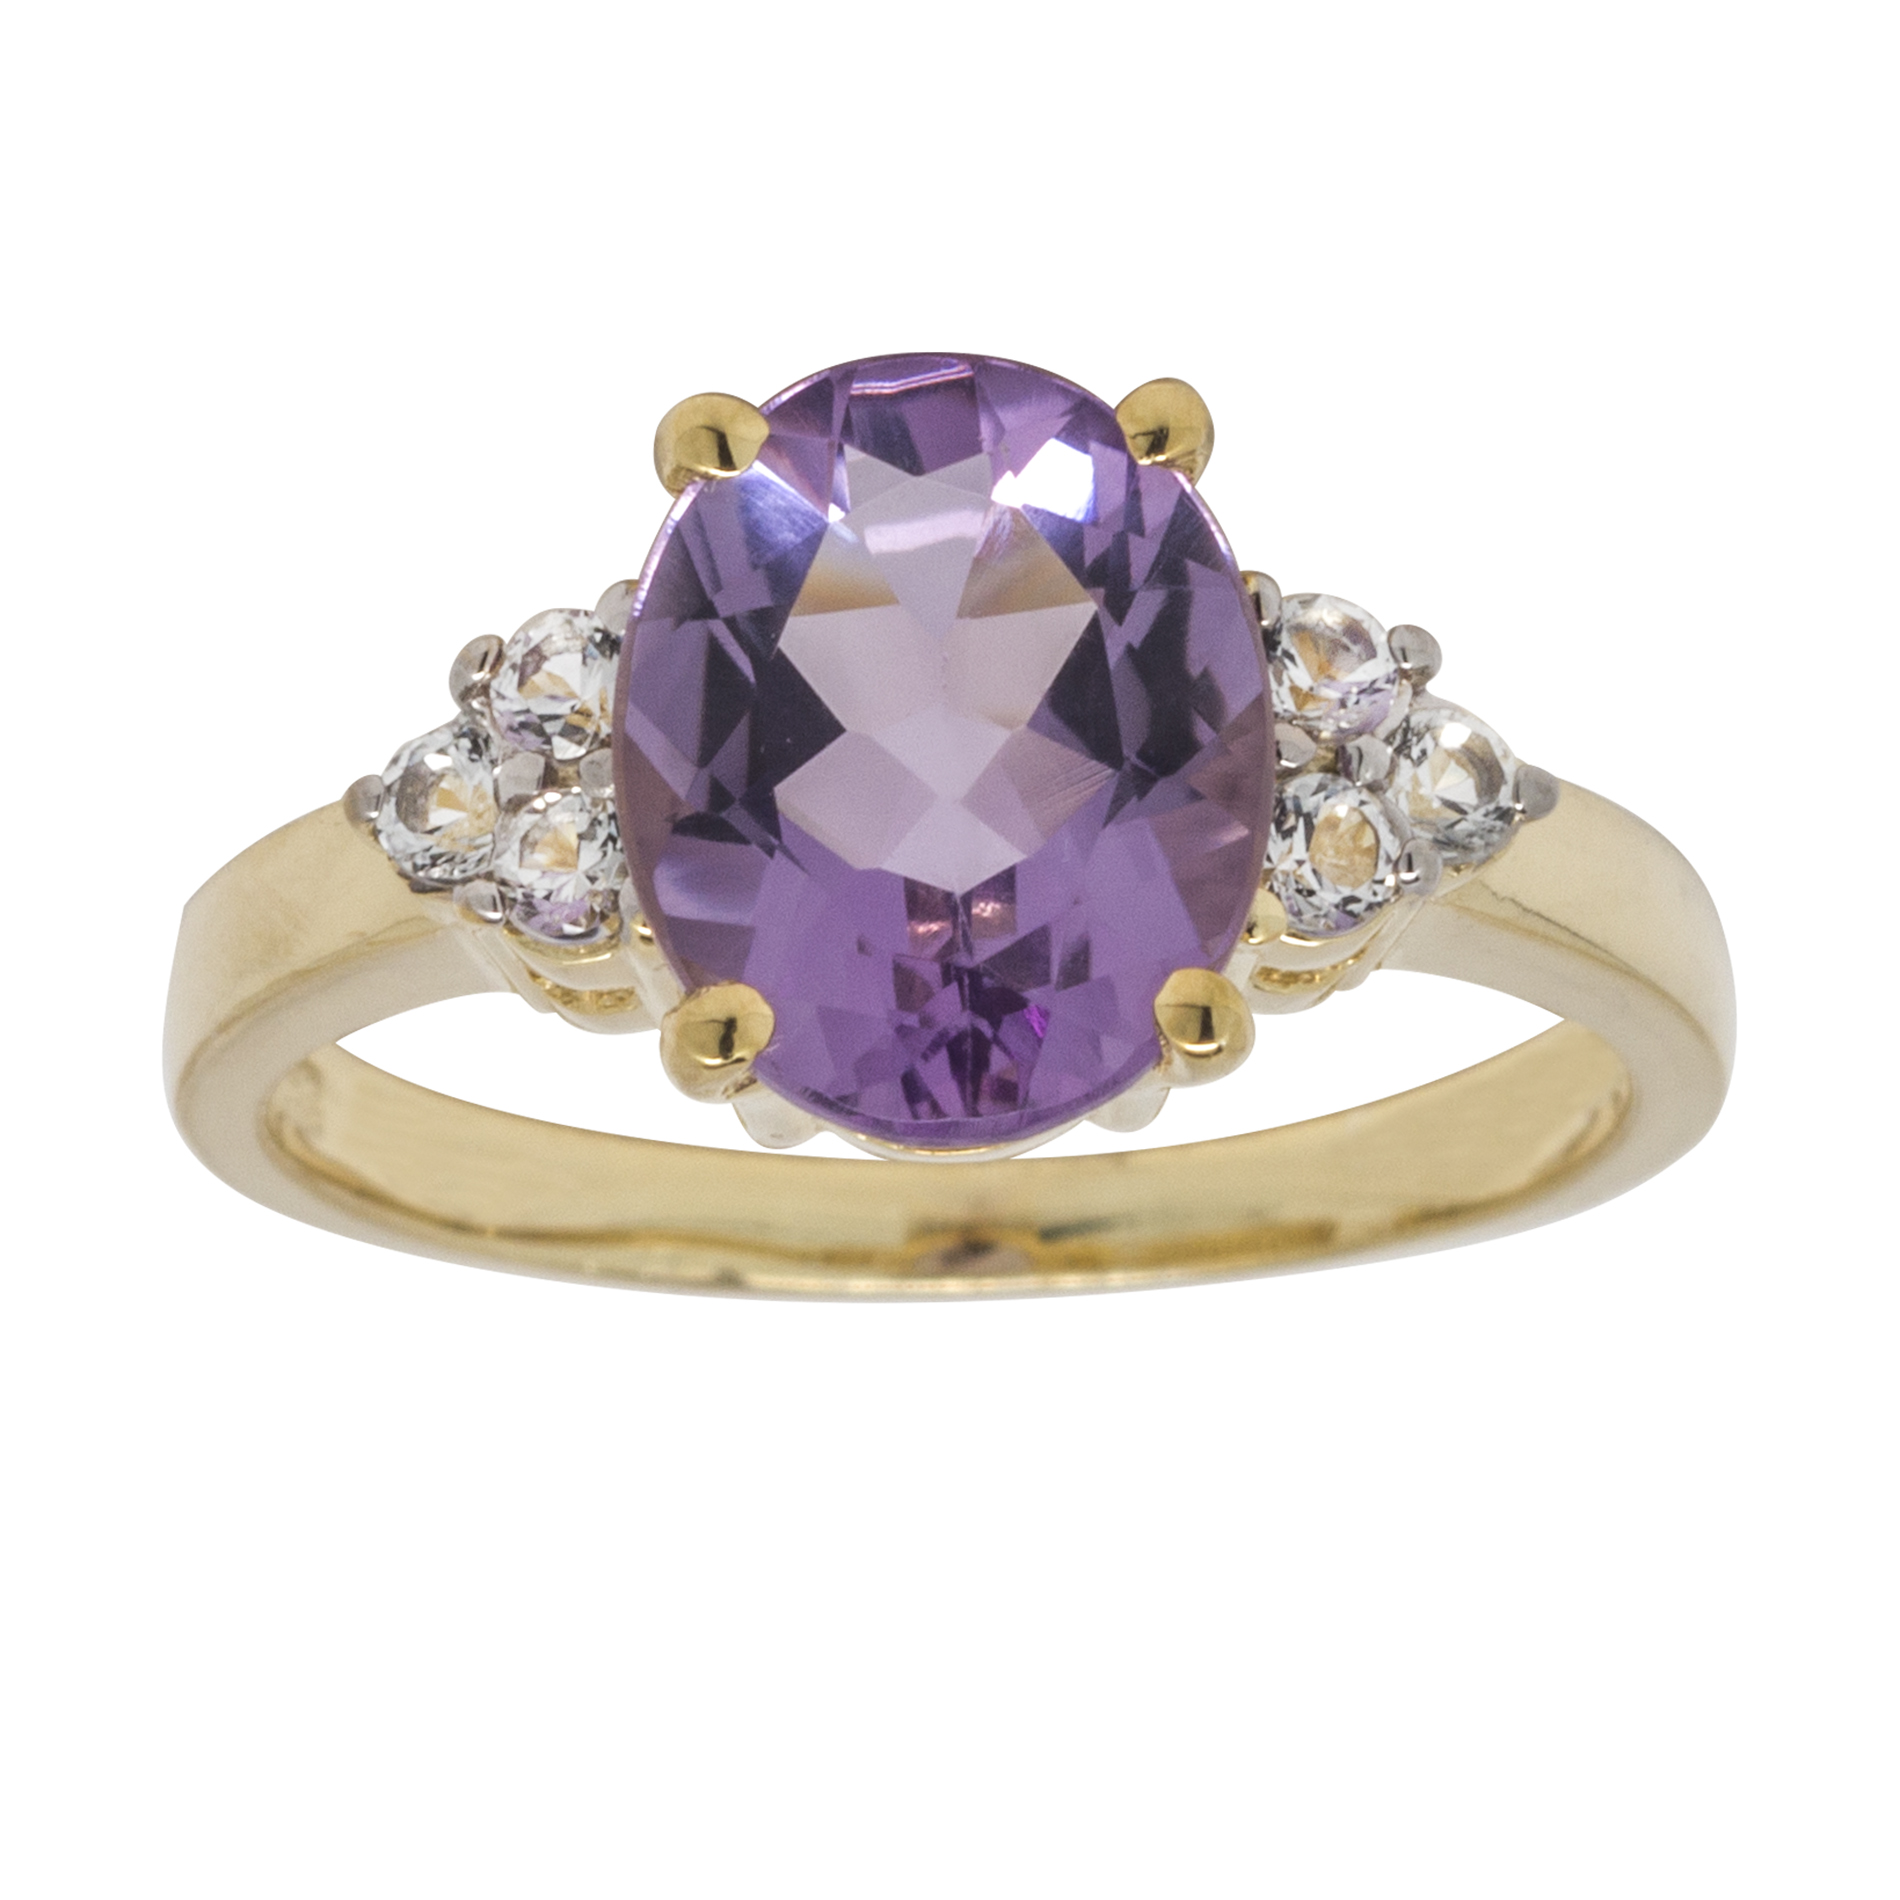 Gold over Sterling Silver Amethyst and White Topaz Ring